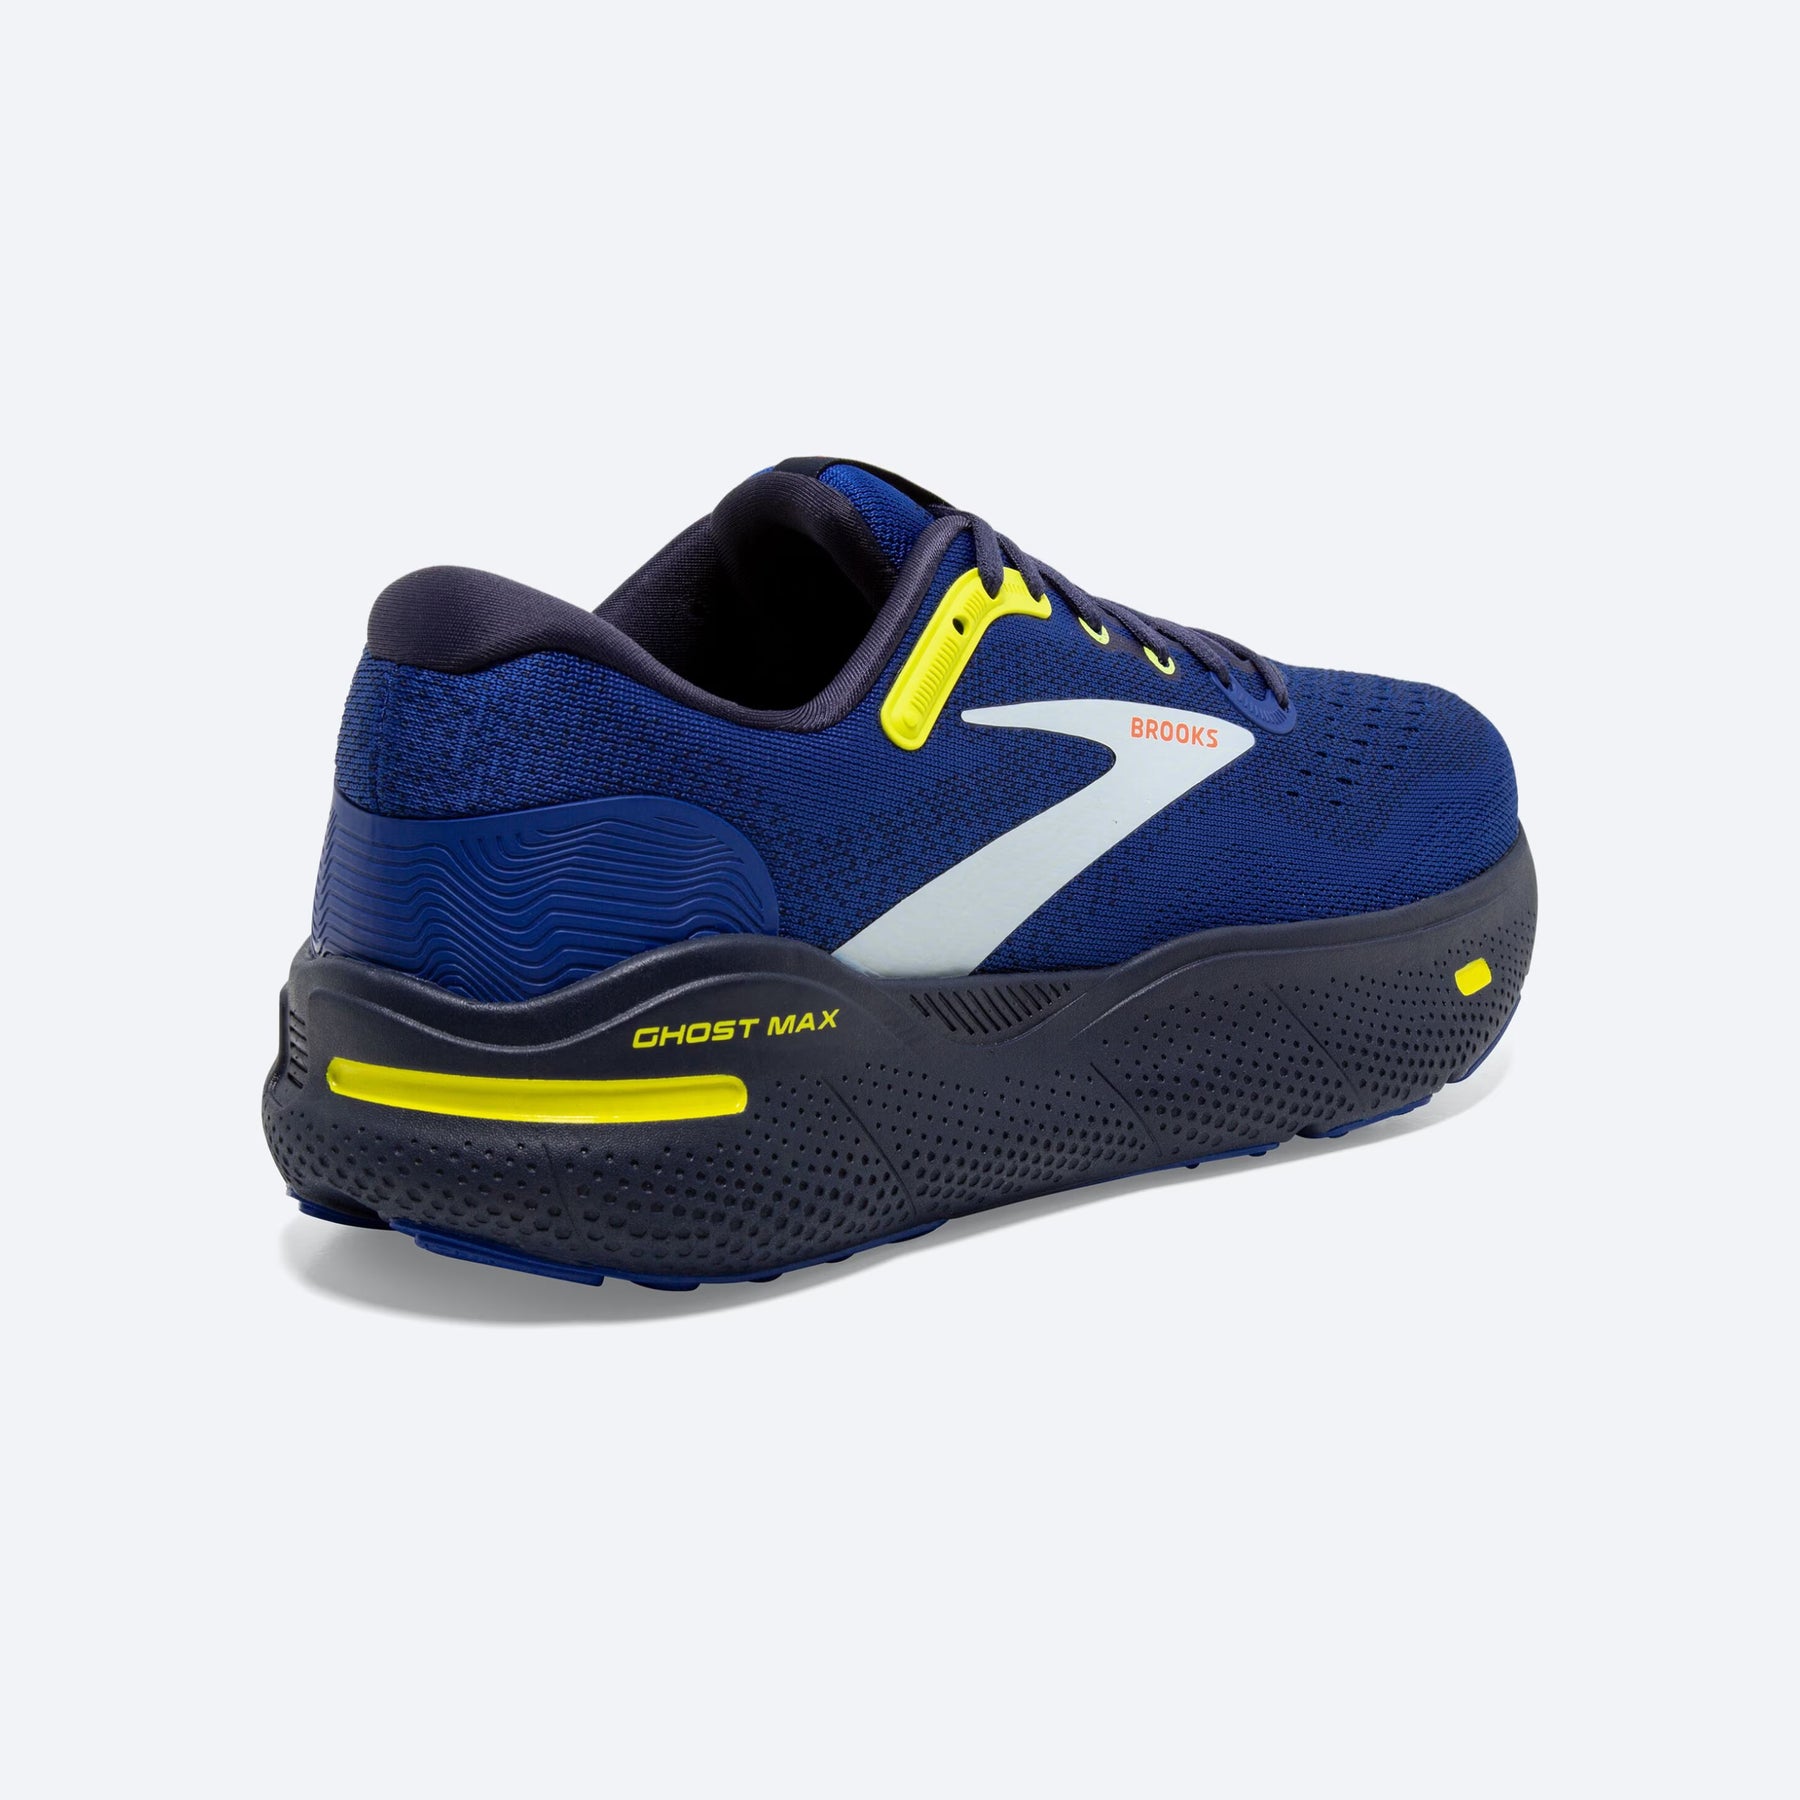 Men's Brooks Ghost Max - Surf the Web/Peacoat/Sulphur - Pacers Running